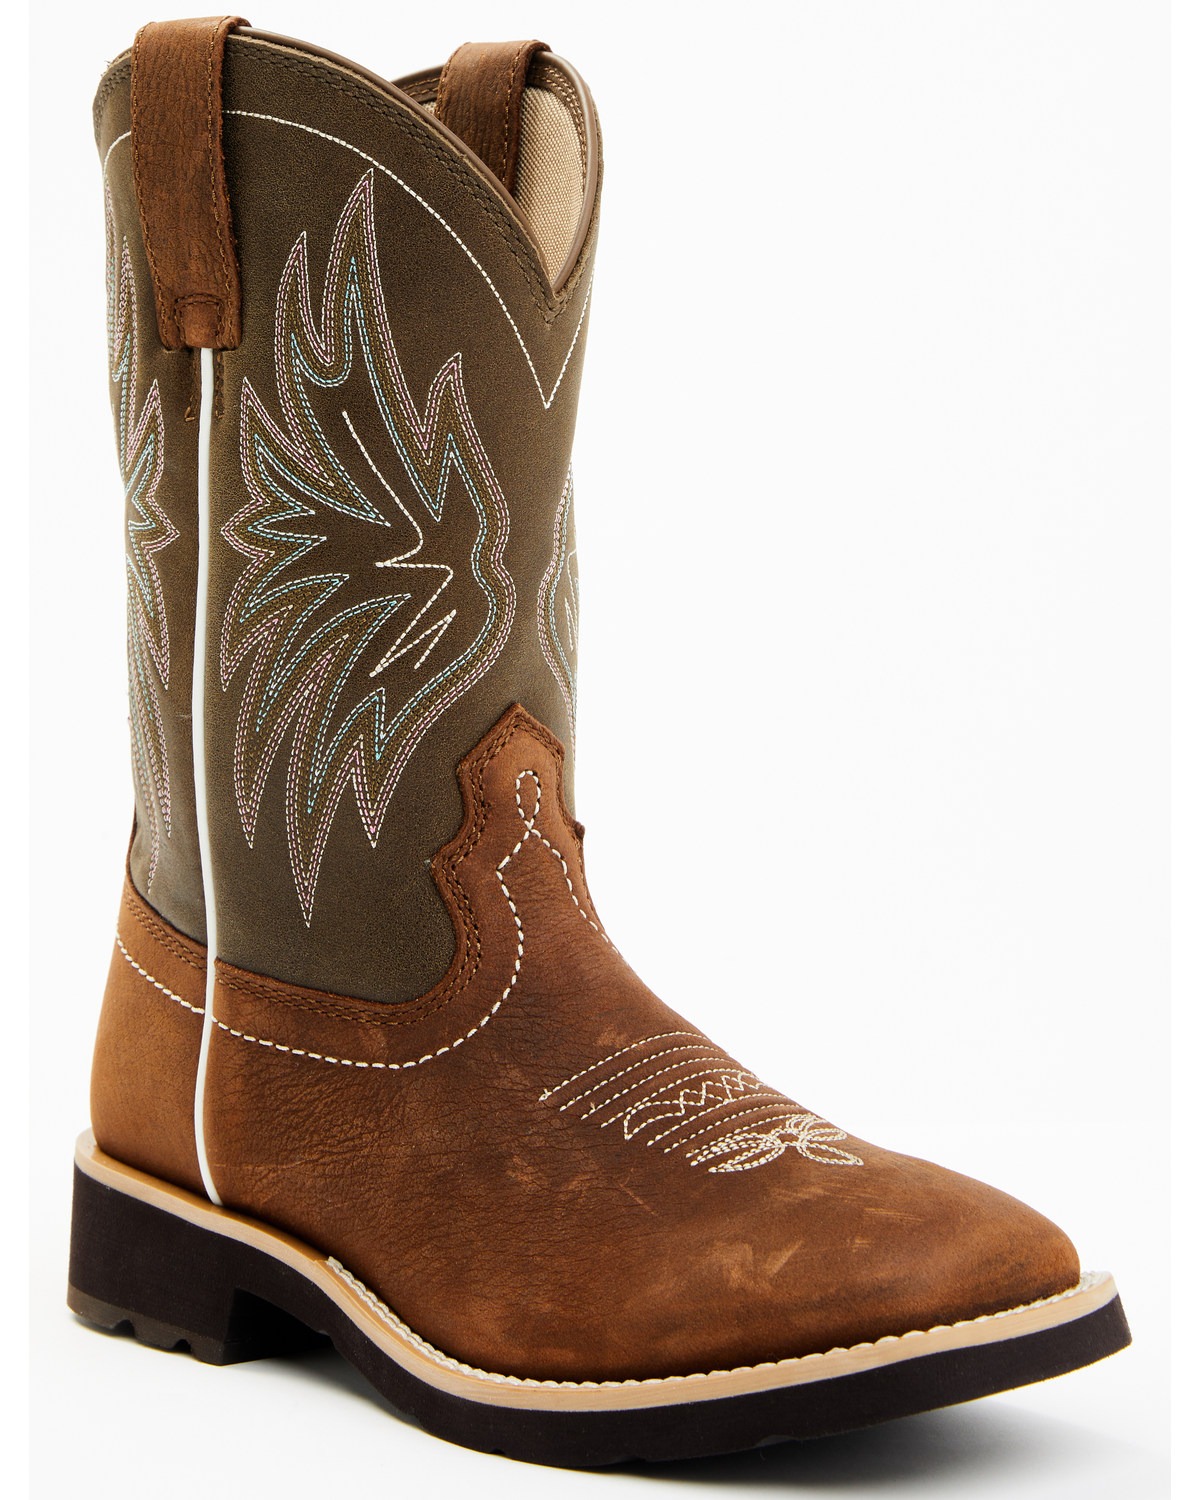 RANK 45® Women's Sage Western Performance Boots - Broad Square Toe